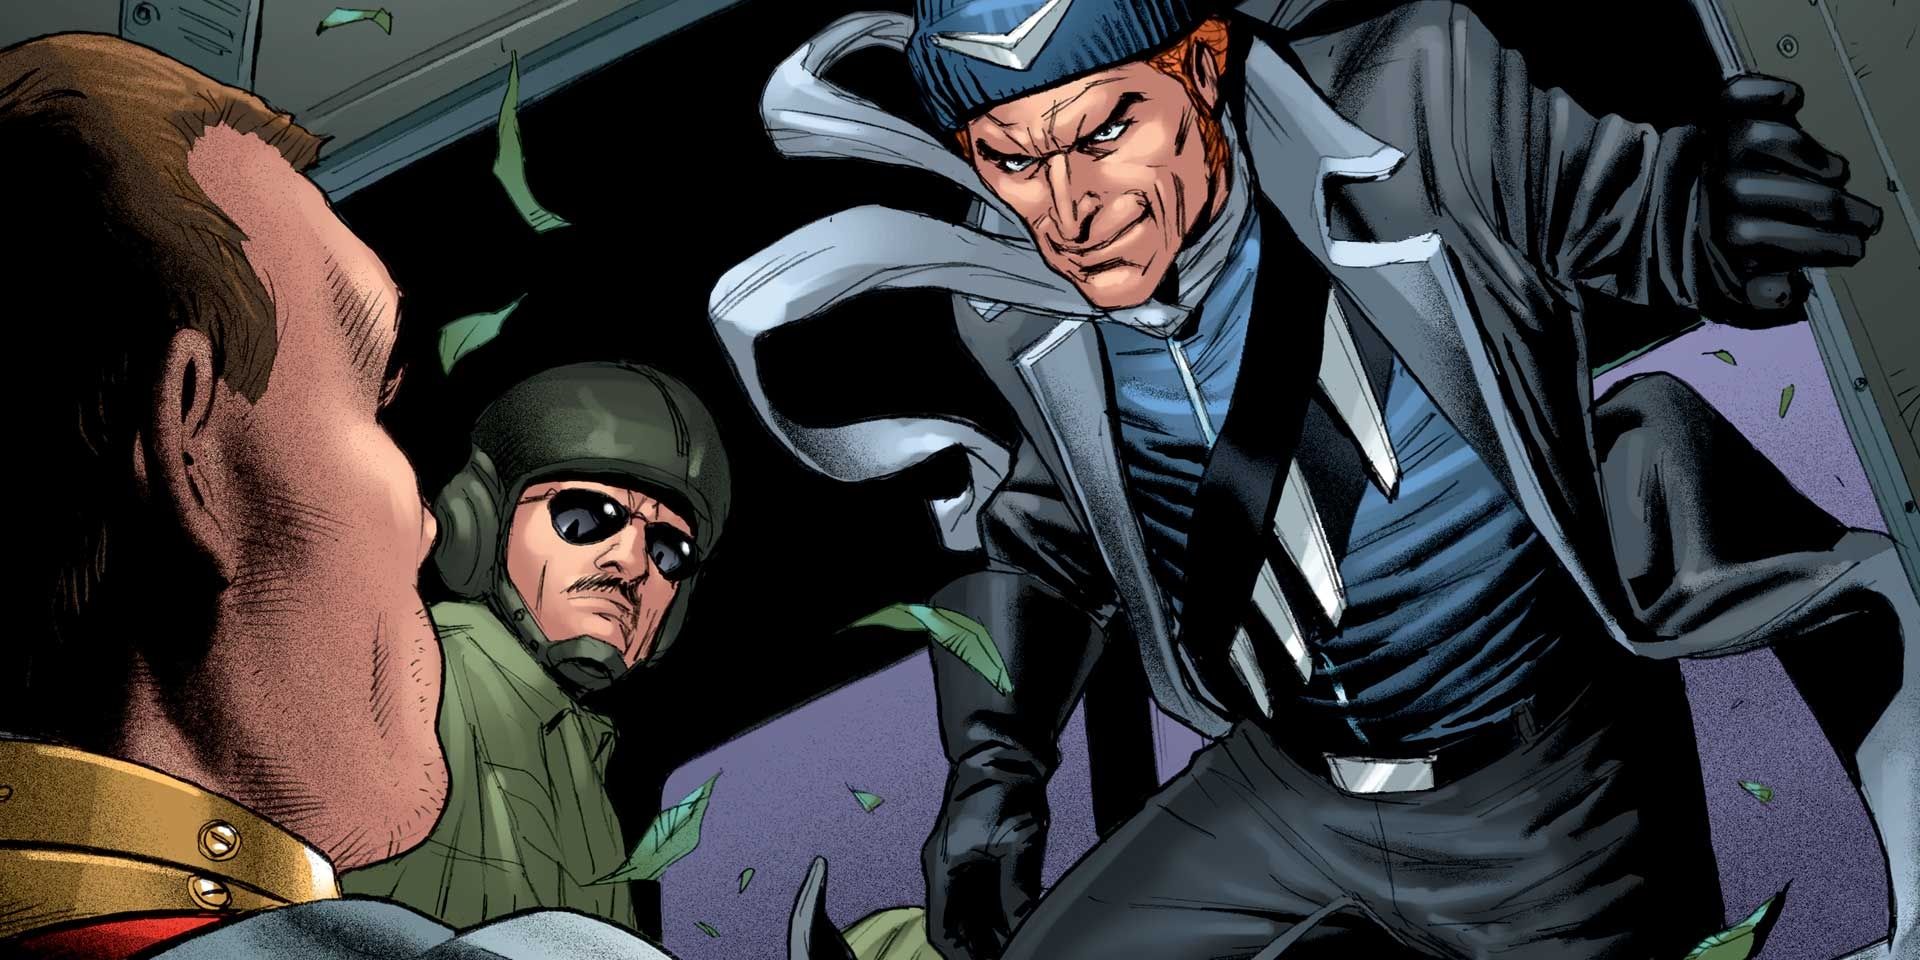 Captain boomerang exits a helicopter in DC Comics